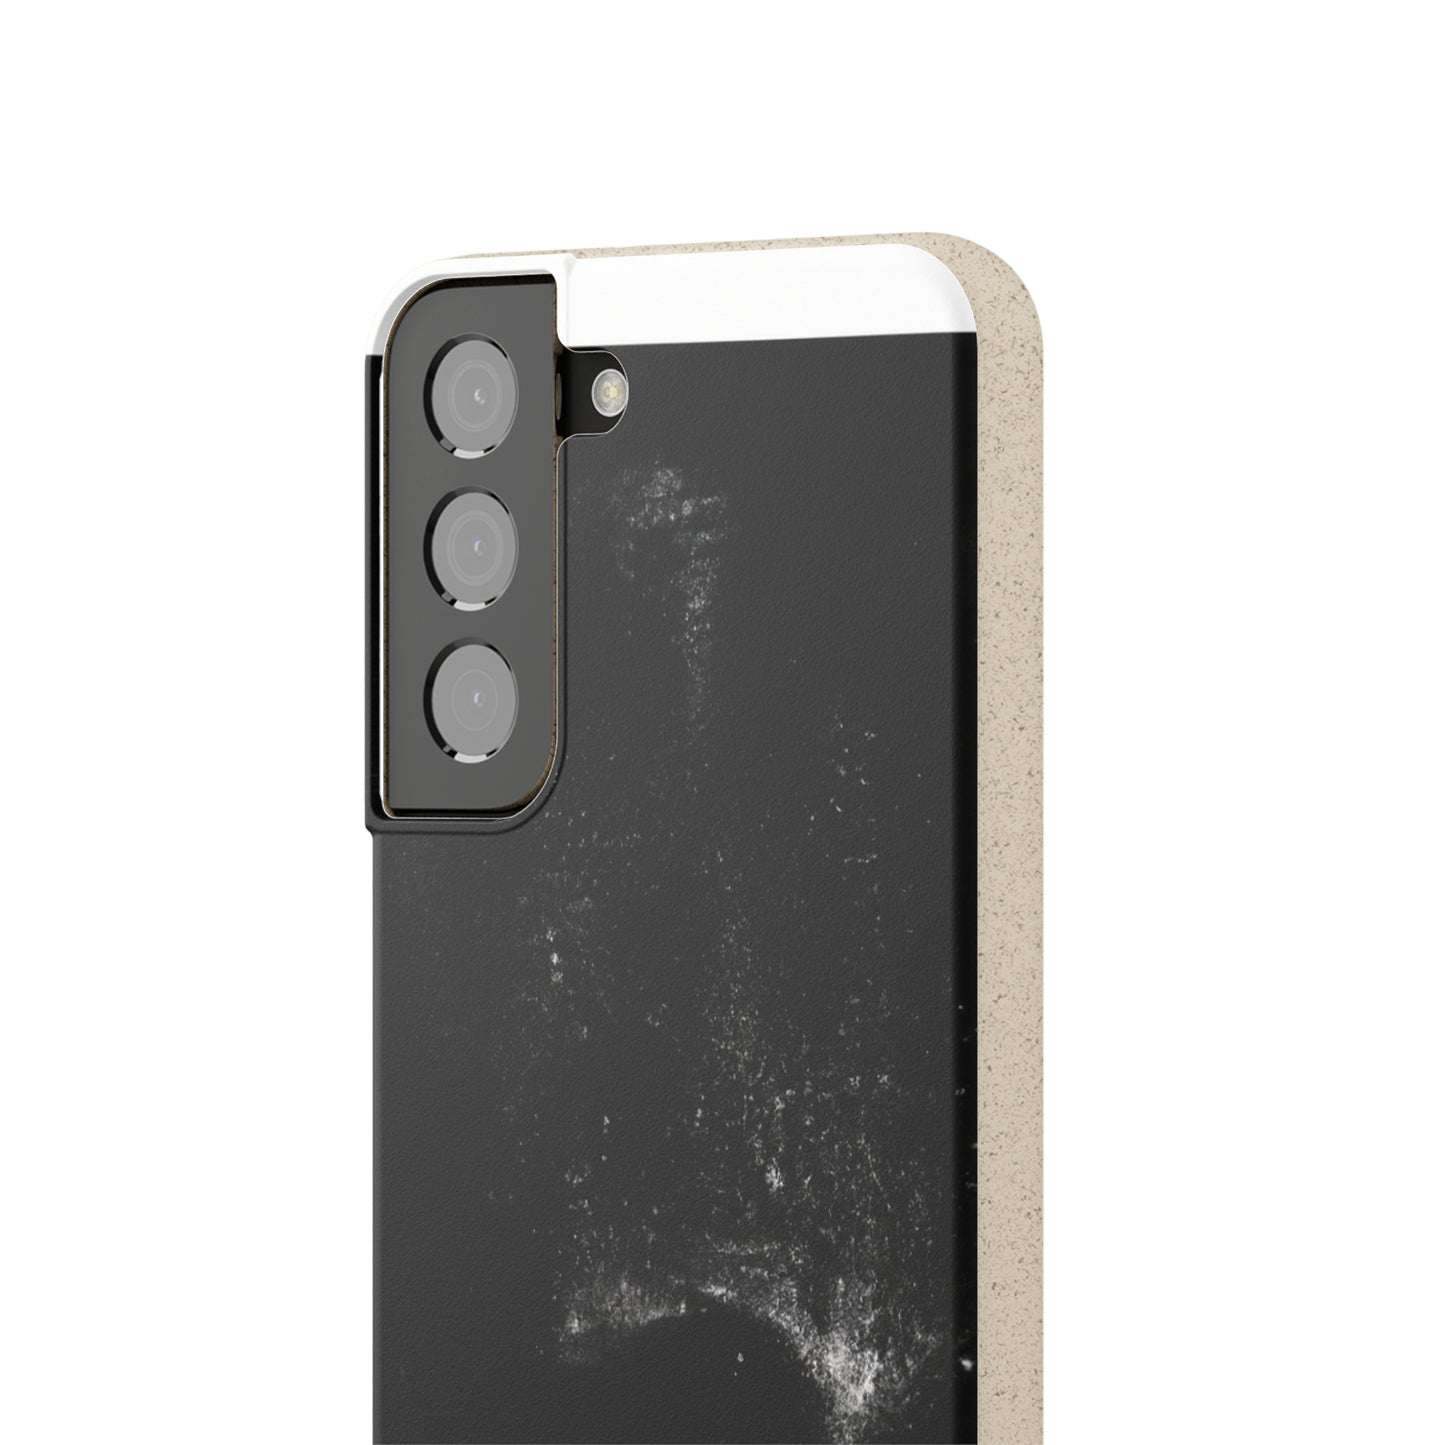 "Shades of Emotion: Exploring the Binary Nature of Light and Dark" - Bam Boo! Lifestyle Eco-friendly Cases